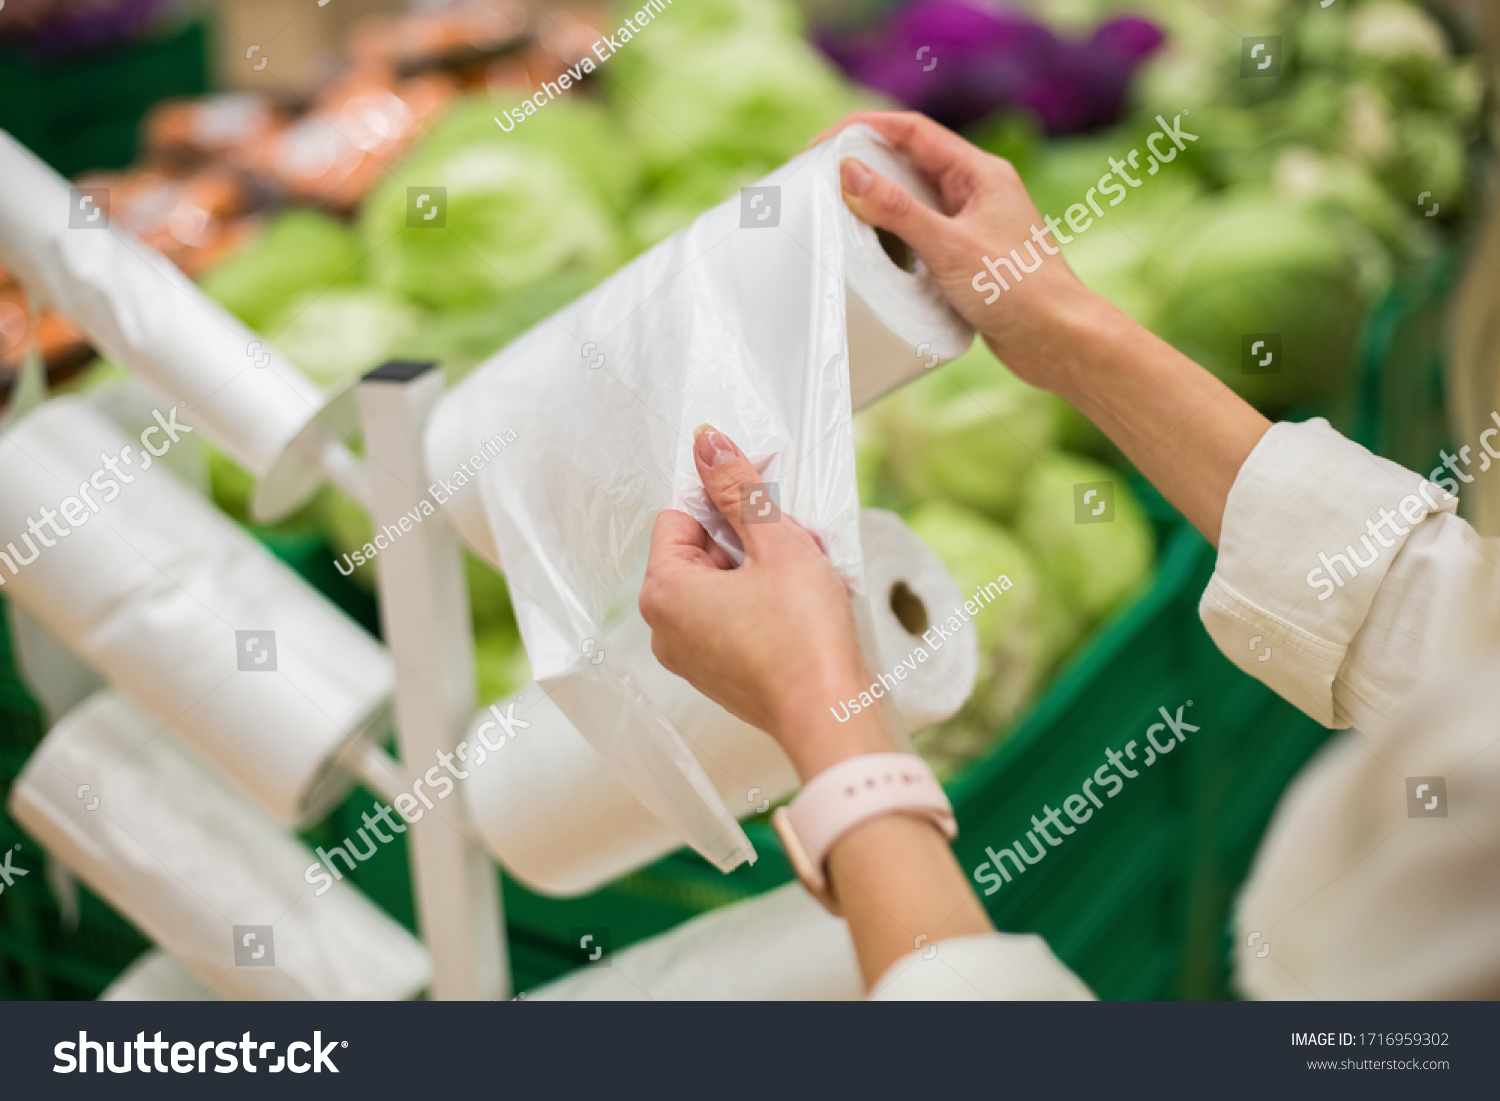 Adult woman taking one plastic package from the roll of packing plastic bags in the vegetable department of the supermarket or grocery store #1716959302